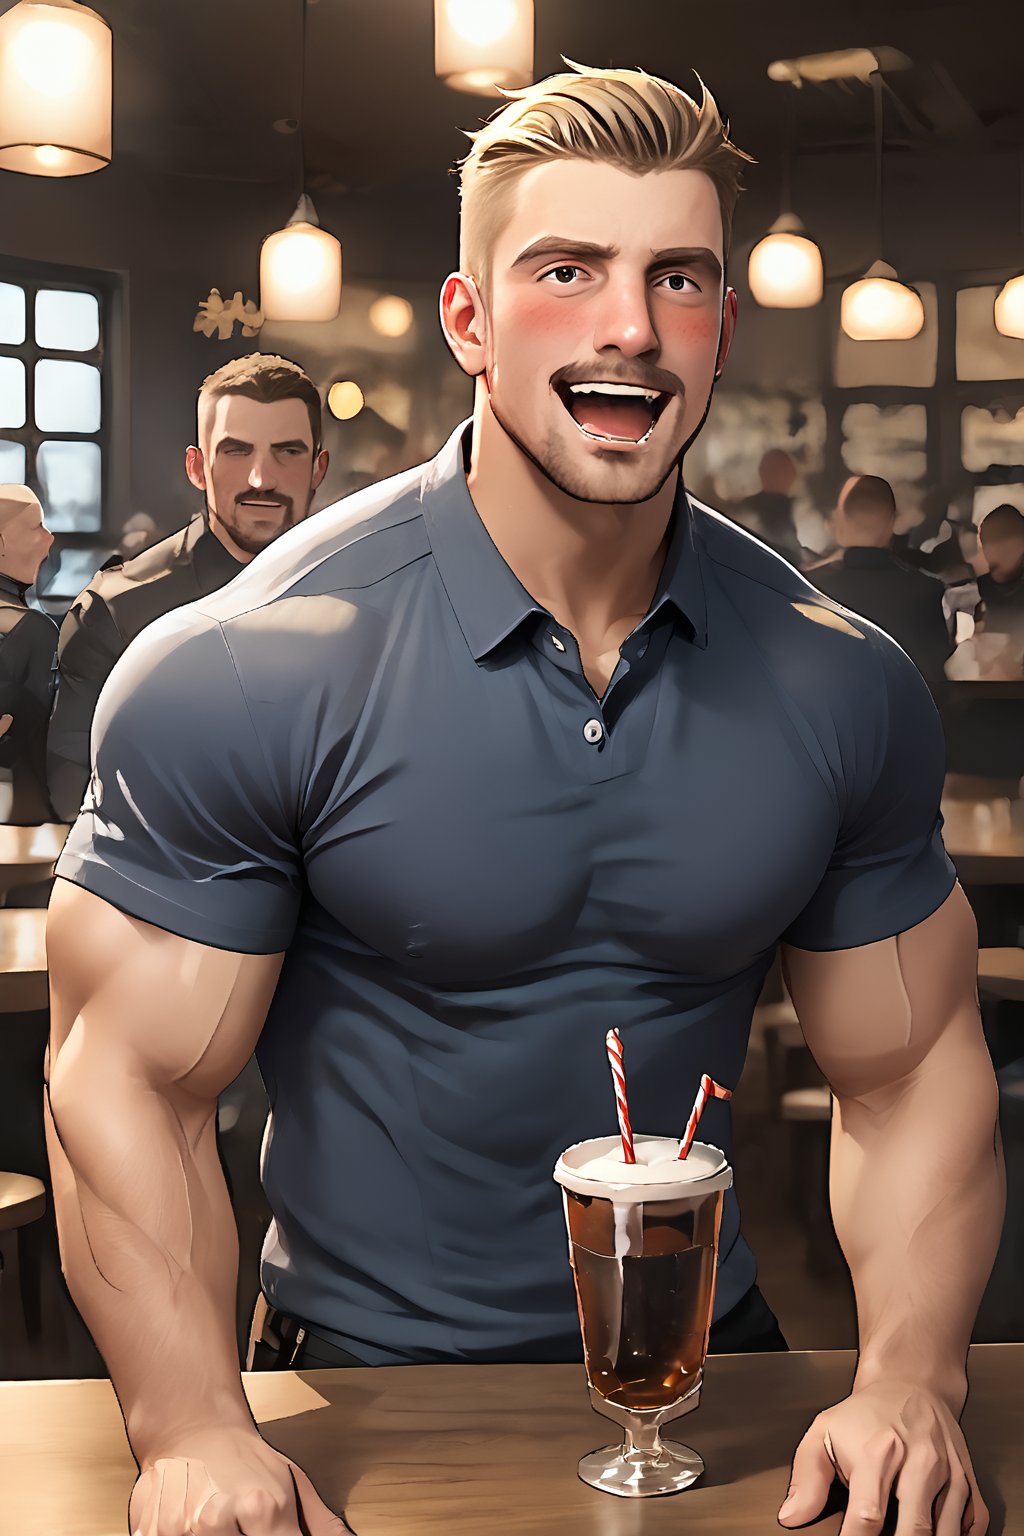 SCORE_9, SCORE_8_UP, 1BOY, MATURE MALE, FORMALWEAR, SHIRT, AT TABLE IN RESTAURANT, DRINK, BLUSHES, mouth open, insanely DRUNK for fun, MUSCULAR, SHORT HAIR, CHEERS, kampai!, DROOLING while laughing FOR FUN, HANDSOME, INTRICATE EYES, MANLY MALE, 3D, CEL-SHADING, SOURCE_ANIME, RATING_QUESTIONABLE, ,r0bbi3r0bbi3